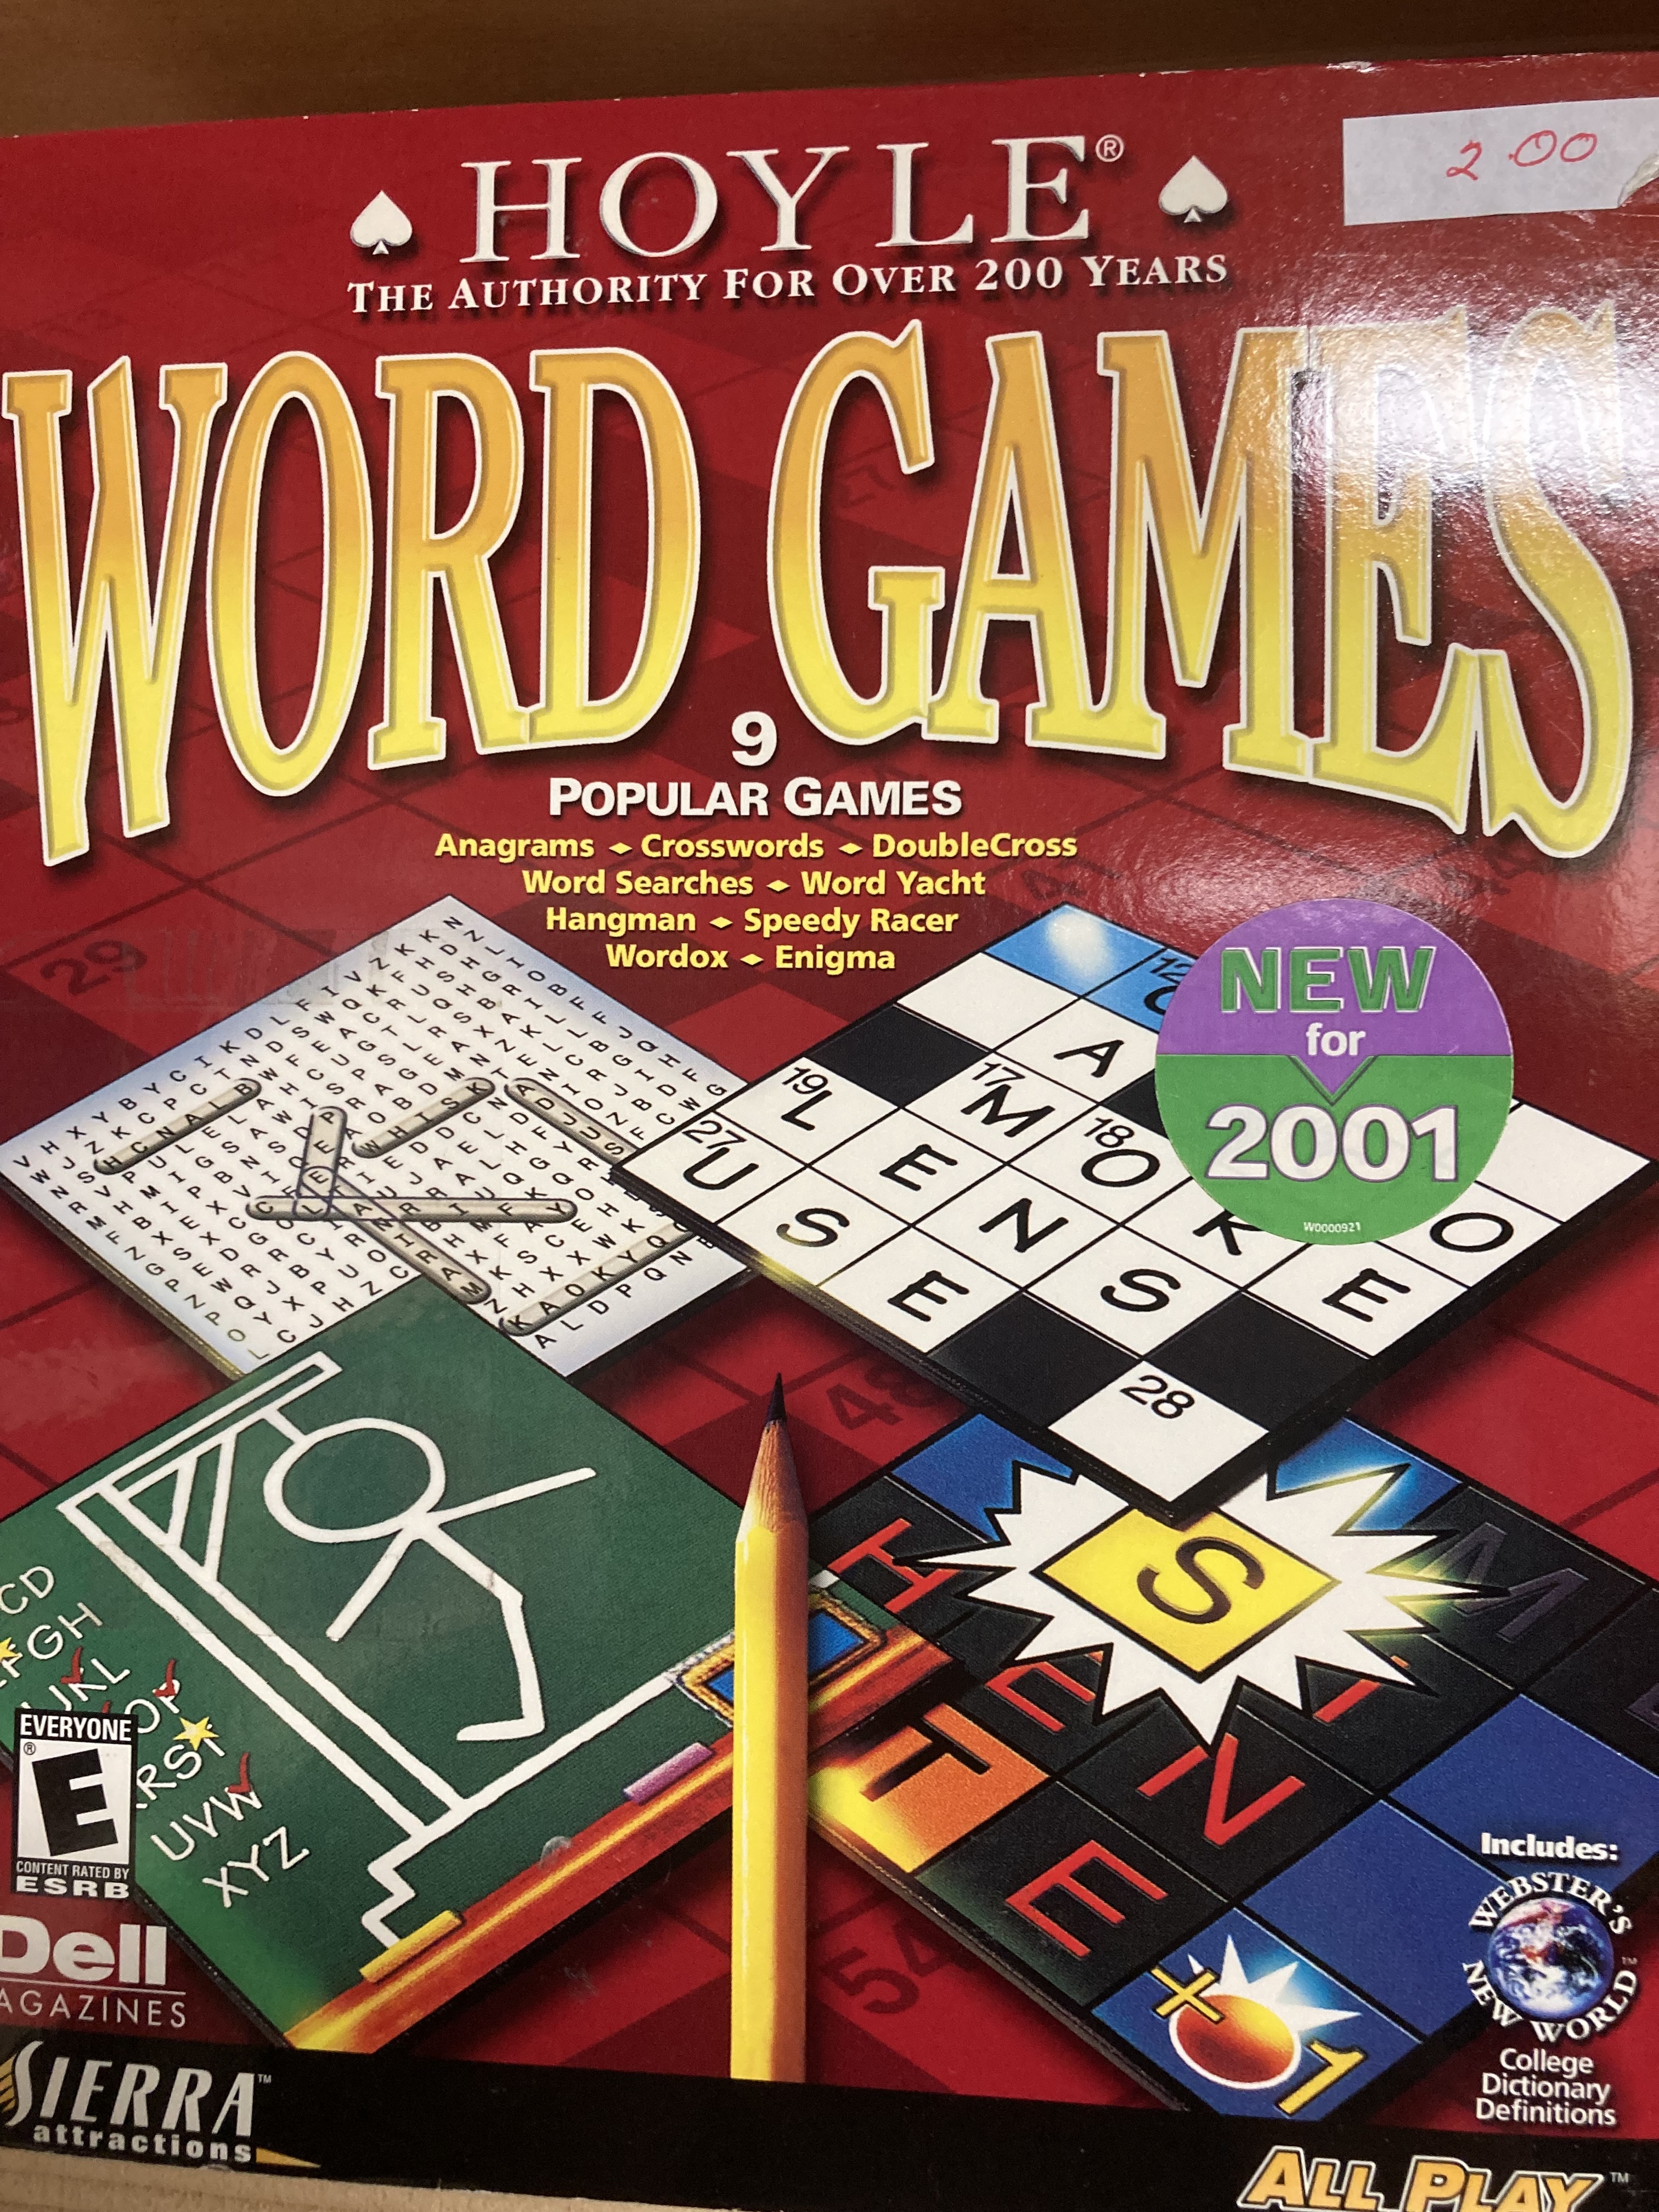 Hoyle Word Games - PC Review and Full Download